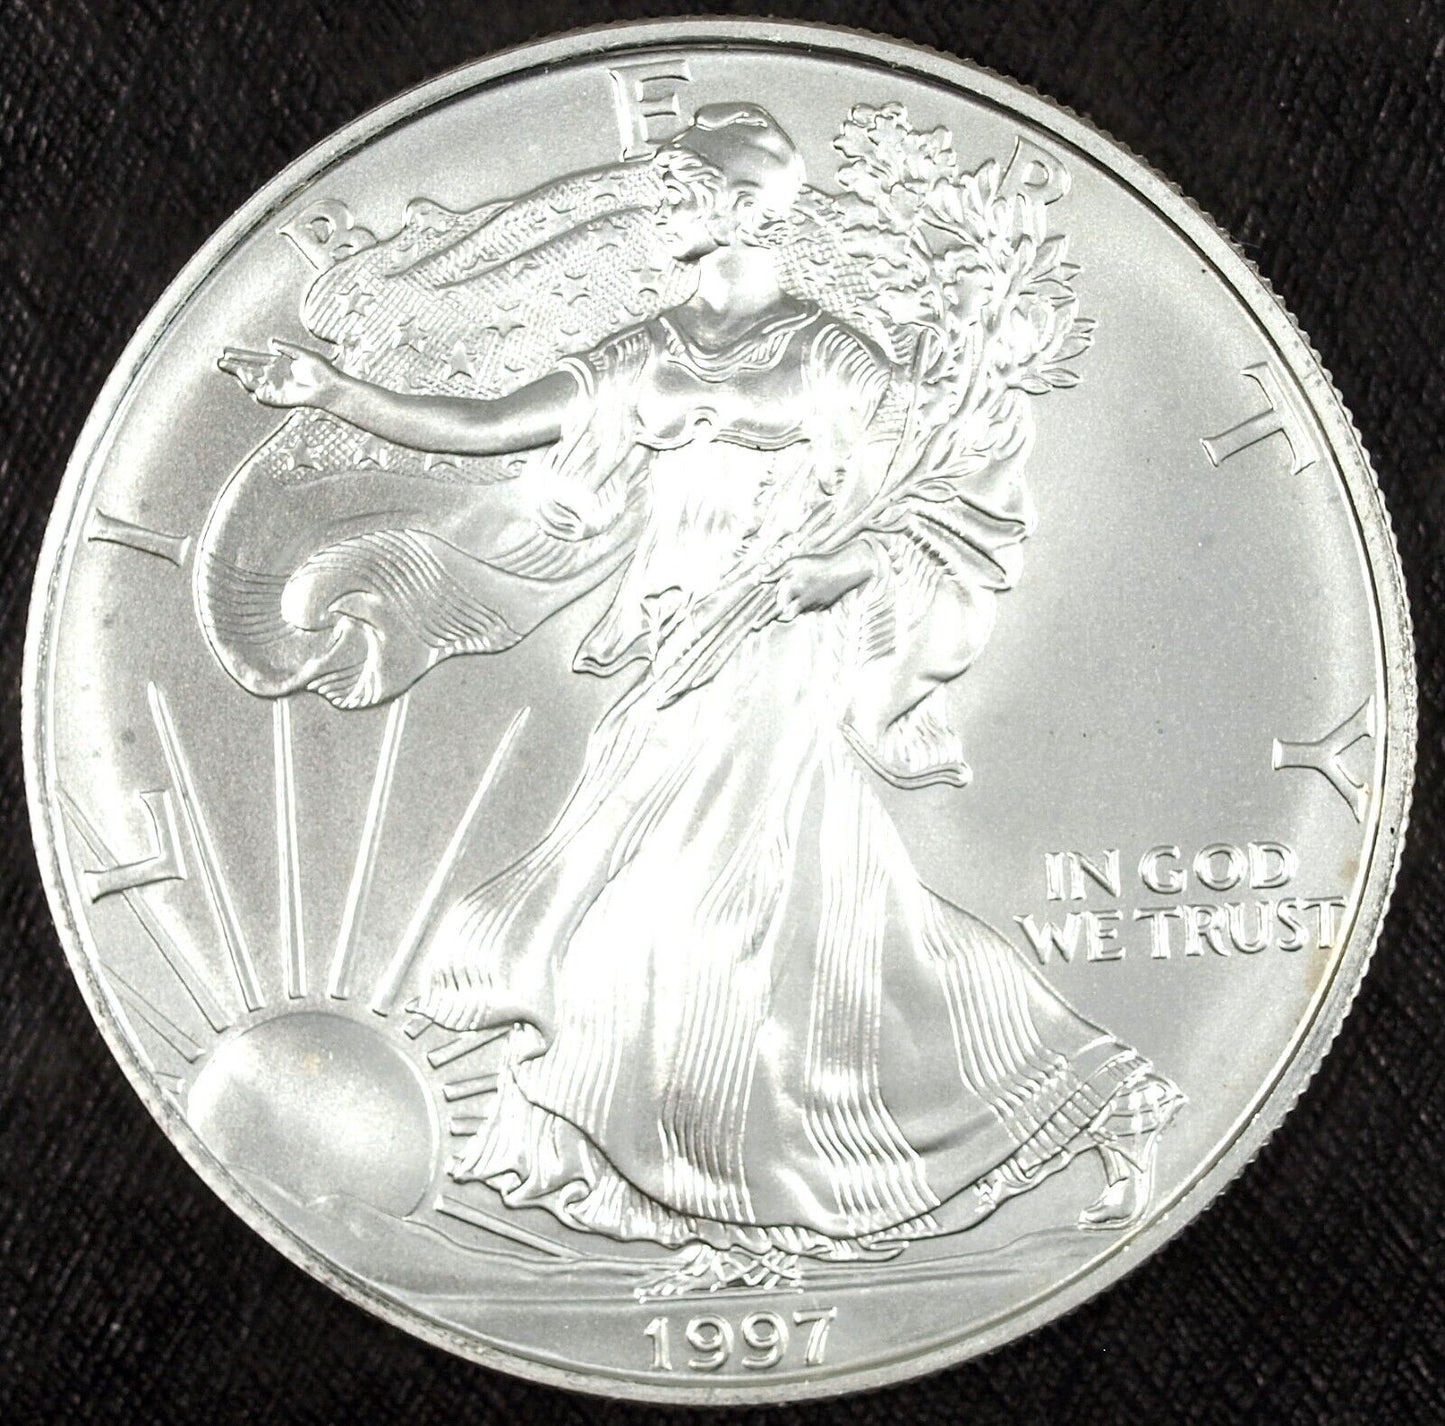 1997 U.S. Mint American Silver Eagle ☆☆ Uncirculated ☆☆ Great Collectible 303